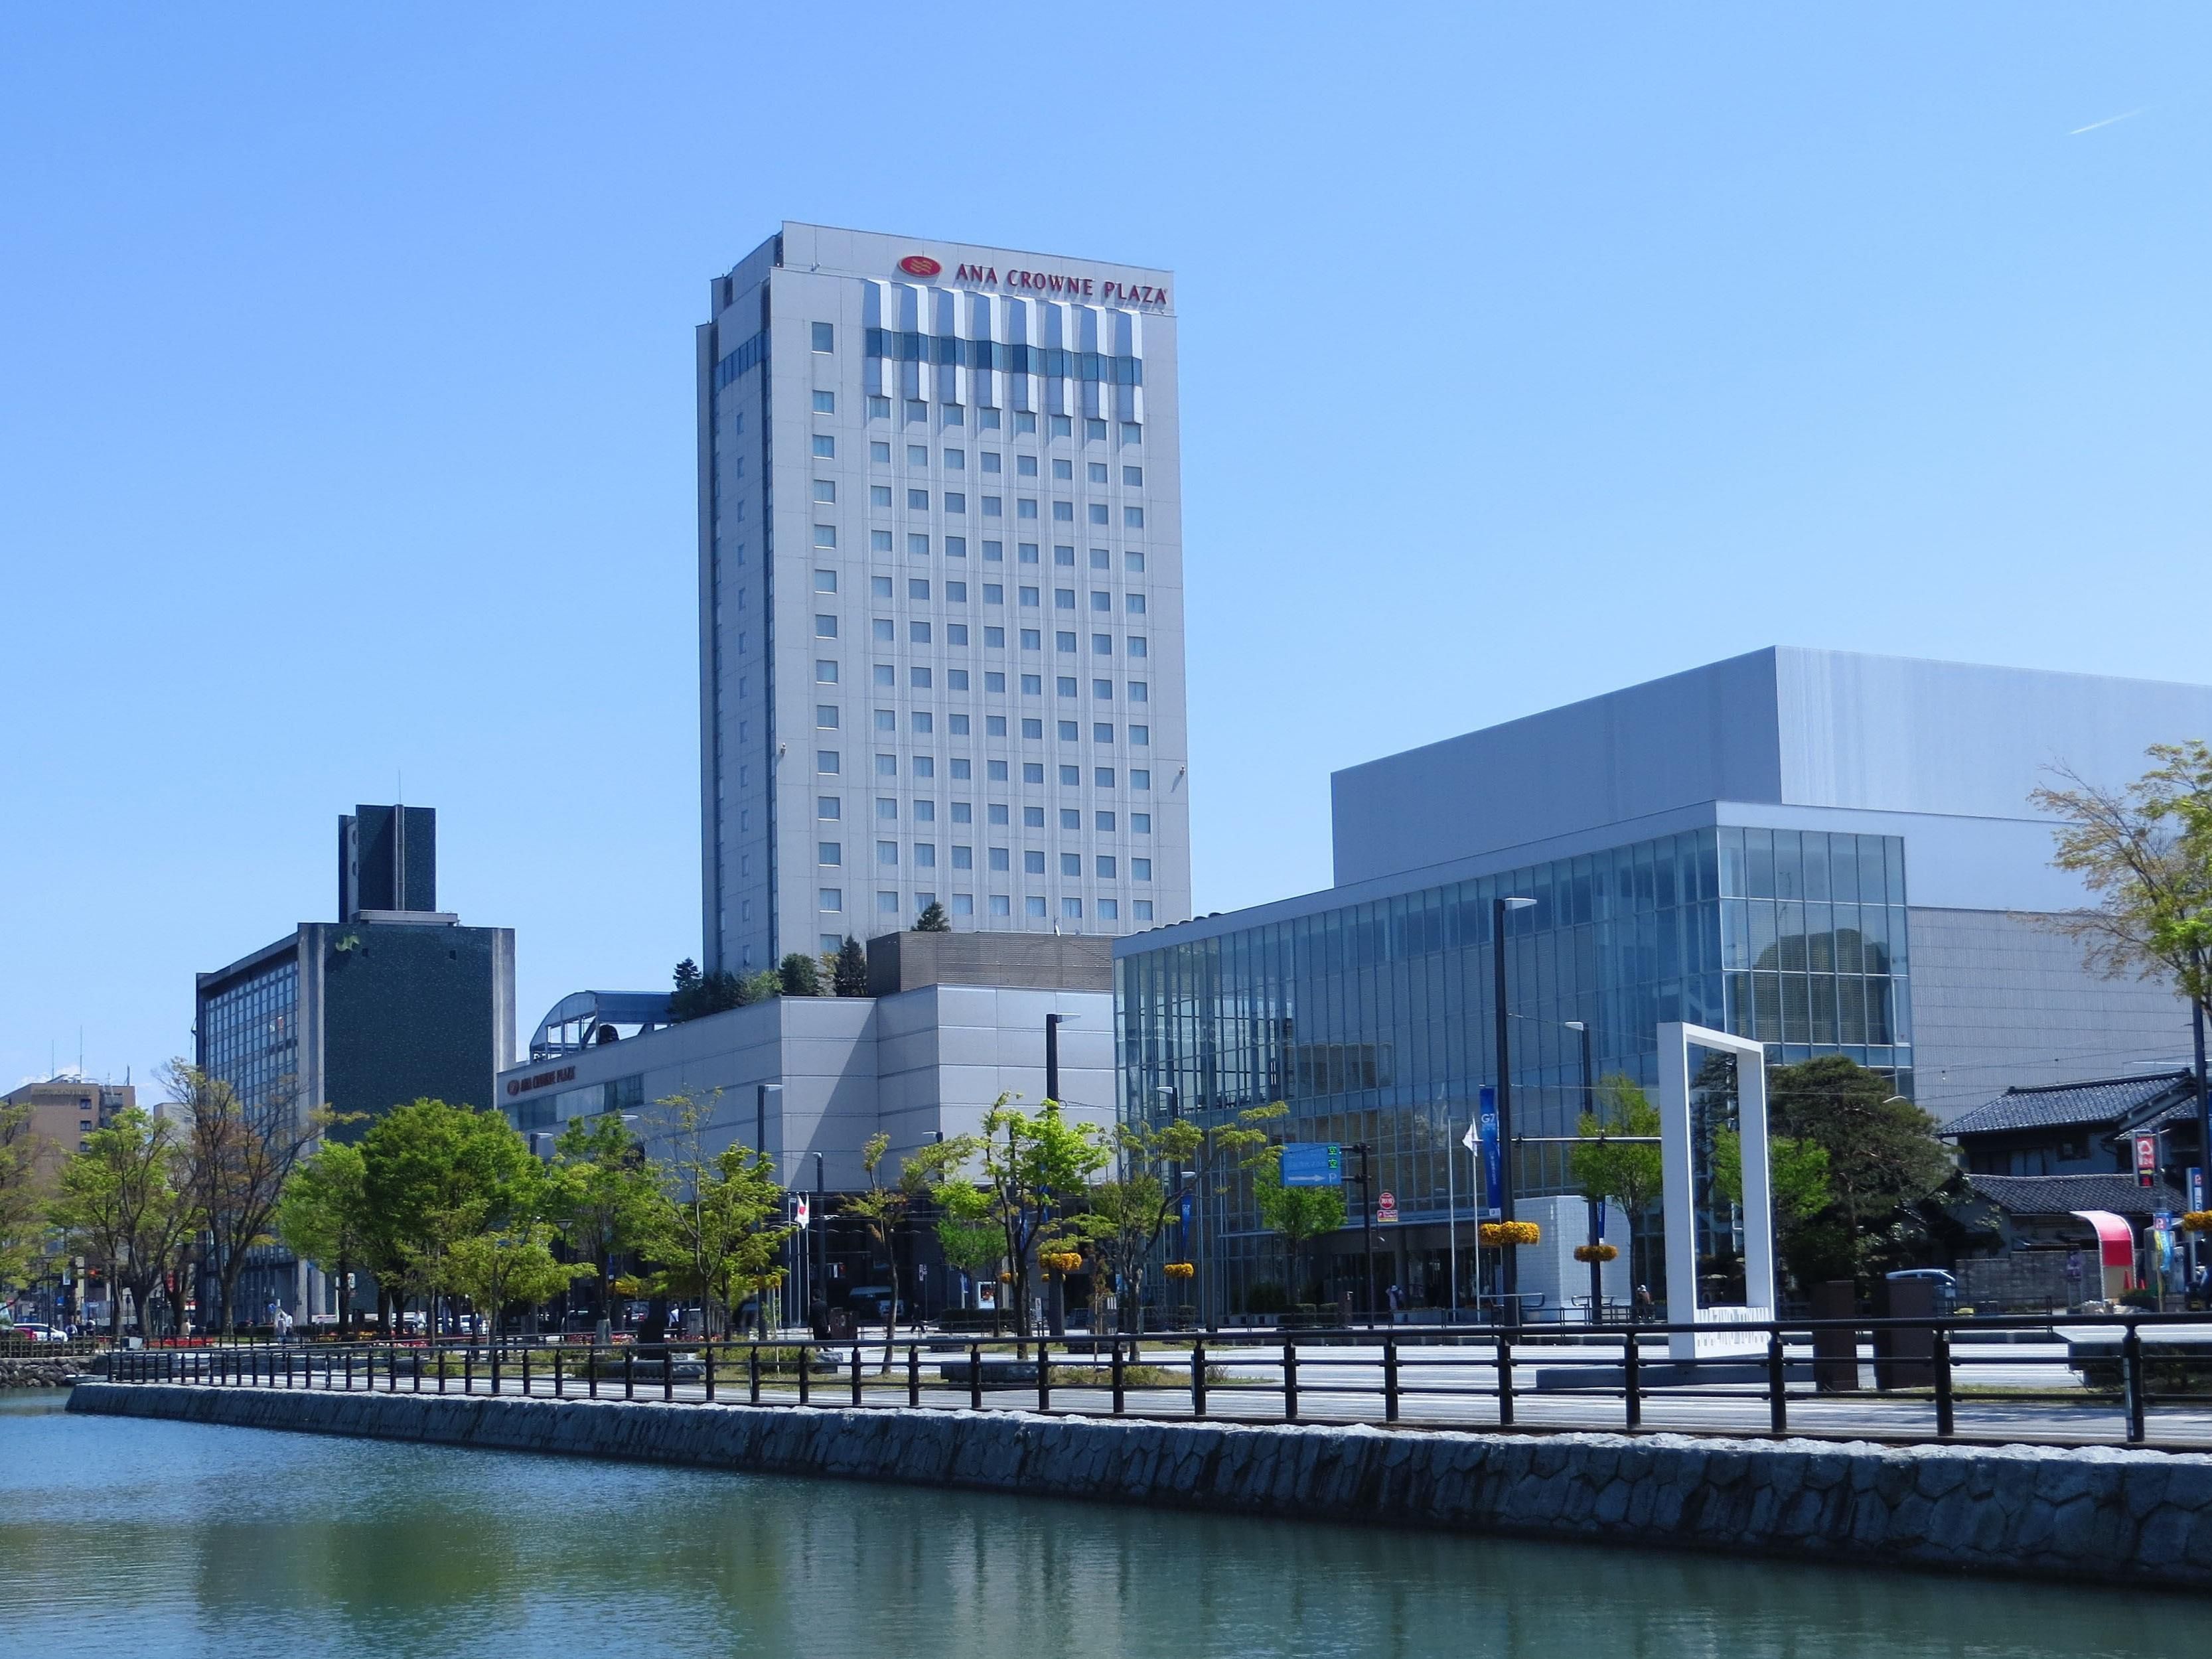 In the heart of the city center, ANA Crowne Plaza Toyama is located right next to Toyama International Conference Center, and is just five minutes' drive or 15 minutes' walk from the JR Toyama rail station. Right outside the hotel, guests have access to the city's tram system. From the hotel, you can also reach the airport in 20 minutes by taxi or